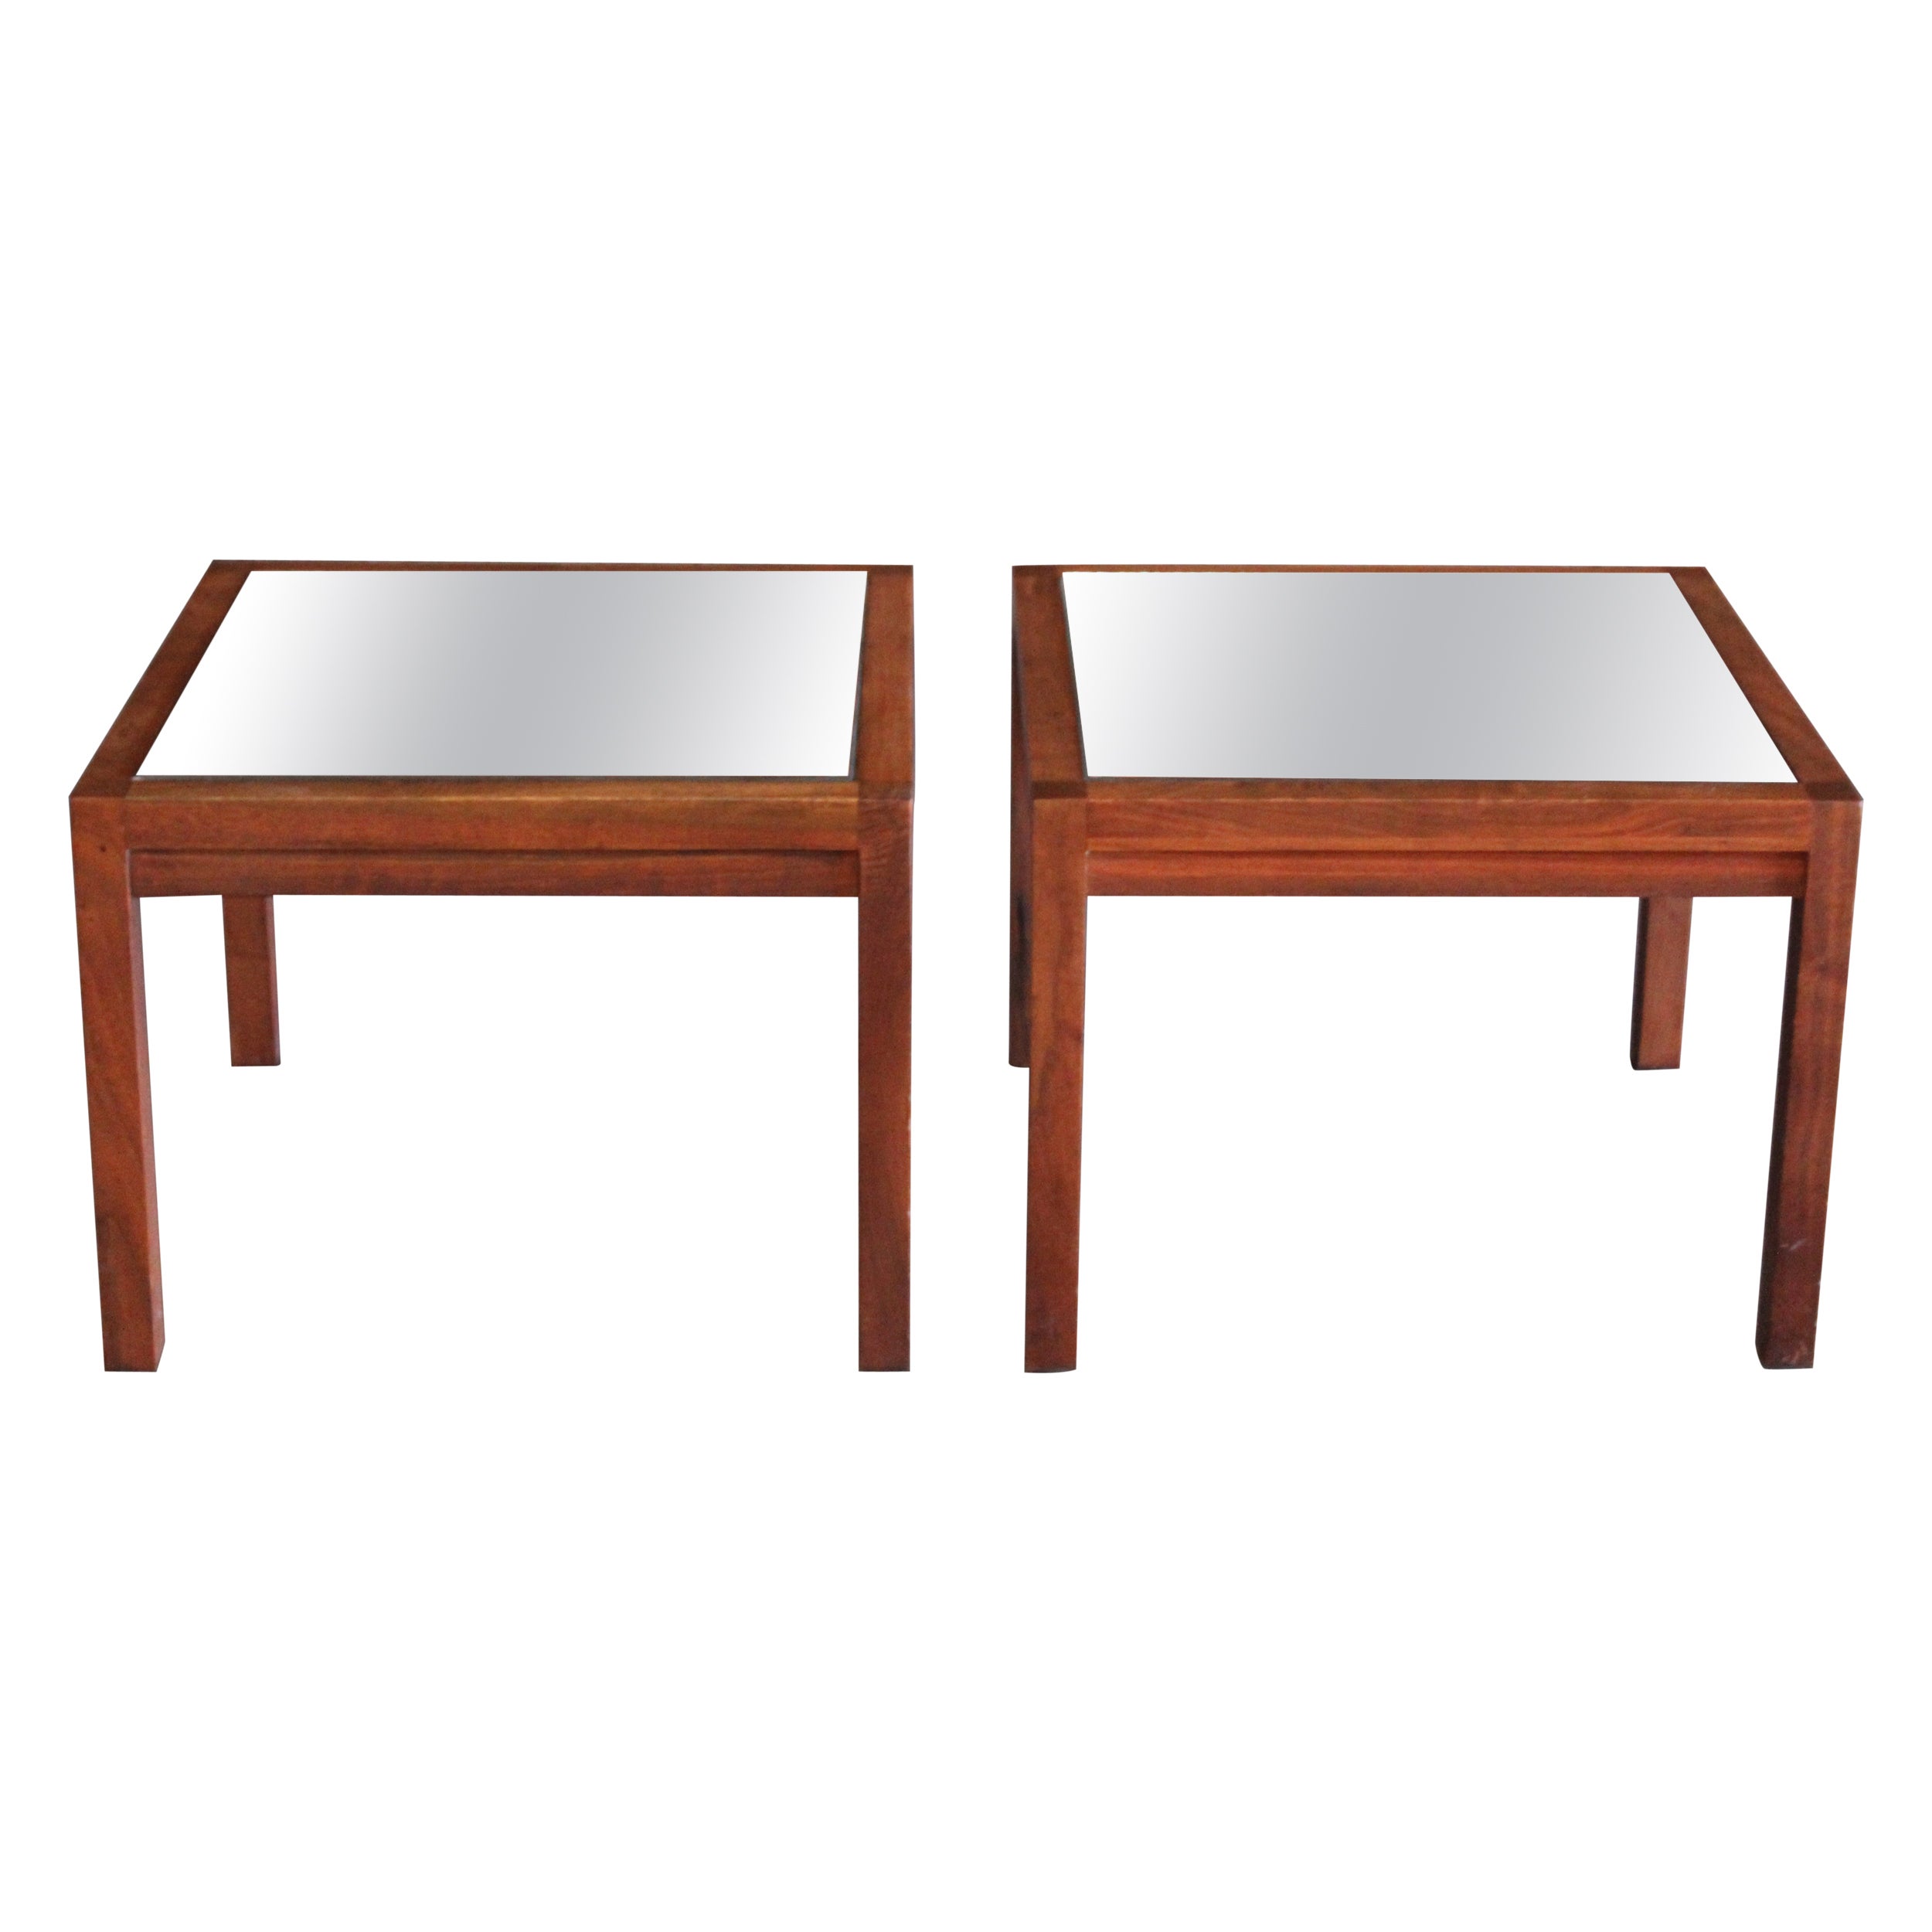 Pair of Walnut Mirrored Side Tables, 1960s For Sale